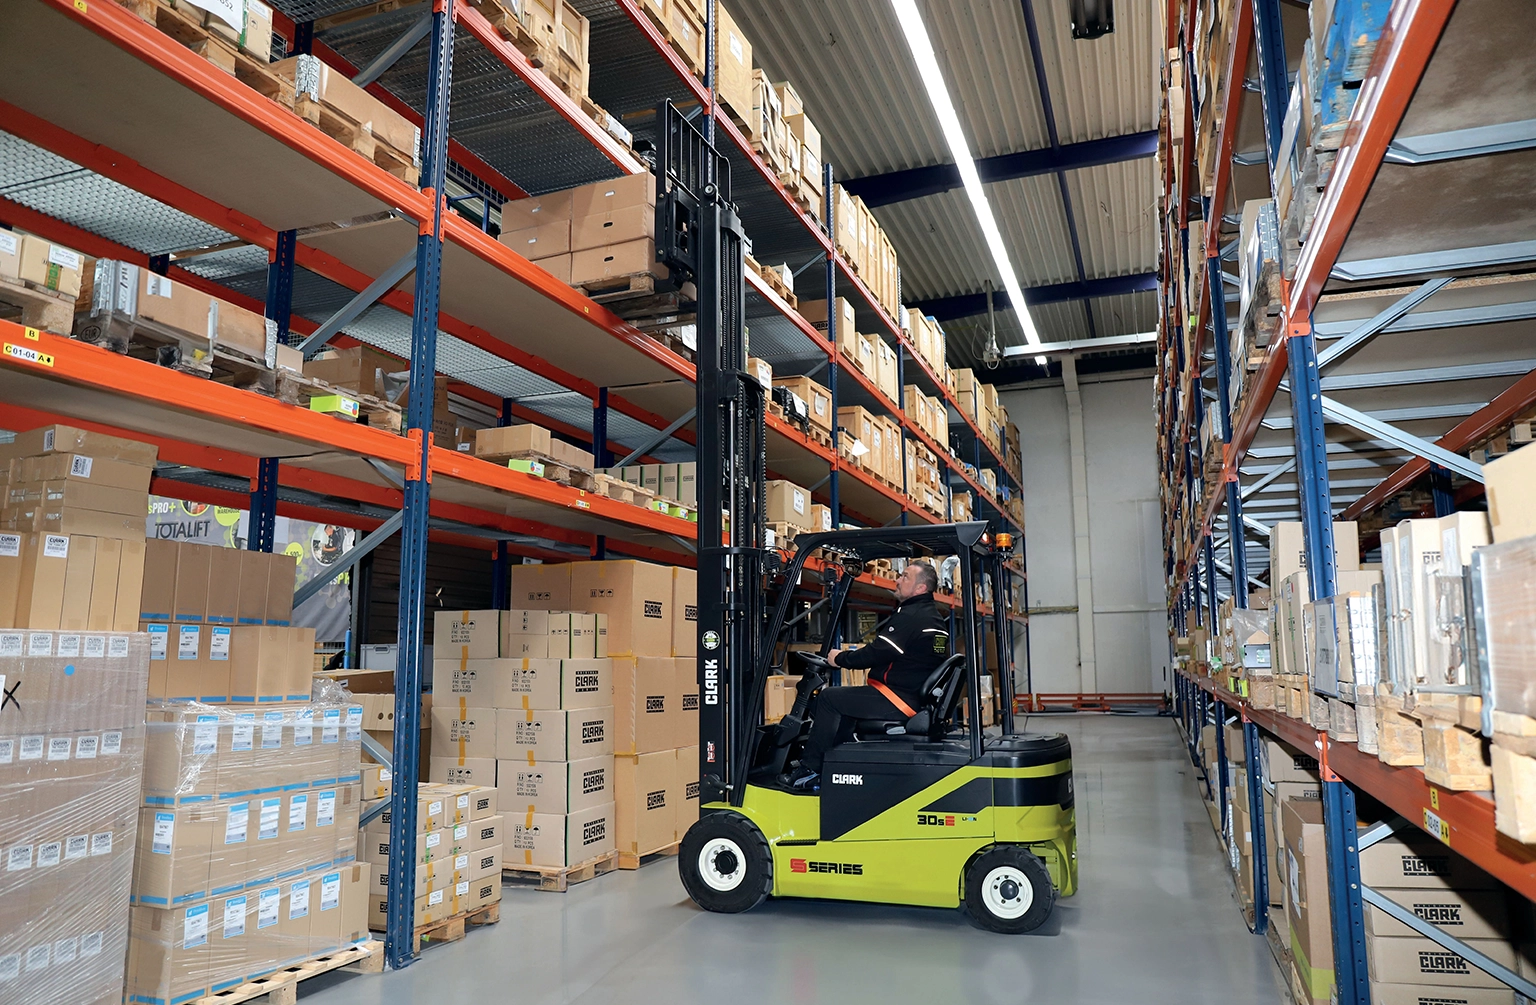 The S-Series Electric is the first generation of electric forklift trucks that, like their IC engine counterparts, are characterized by the attributes Smart, Strong and Safe